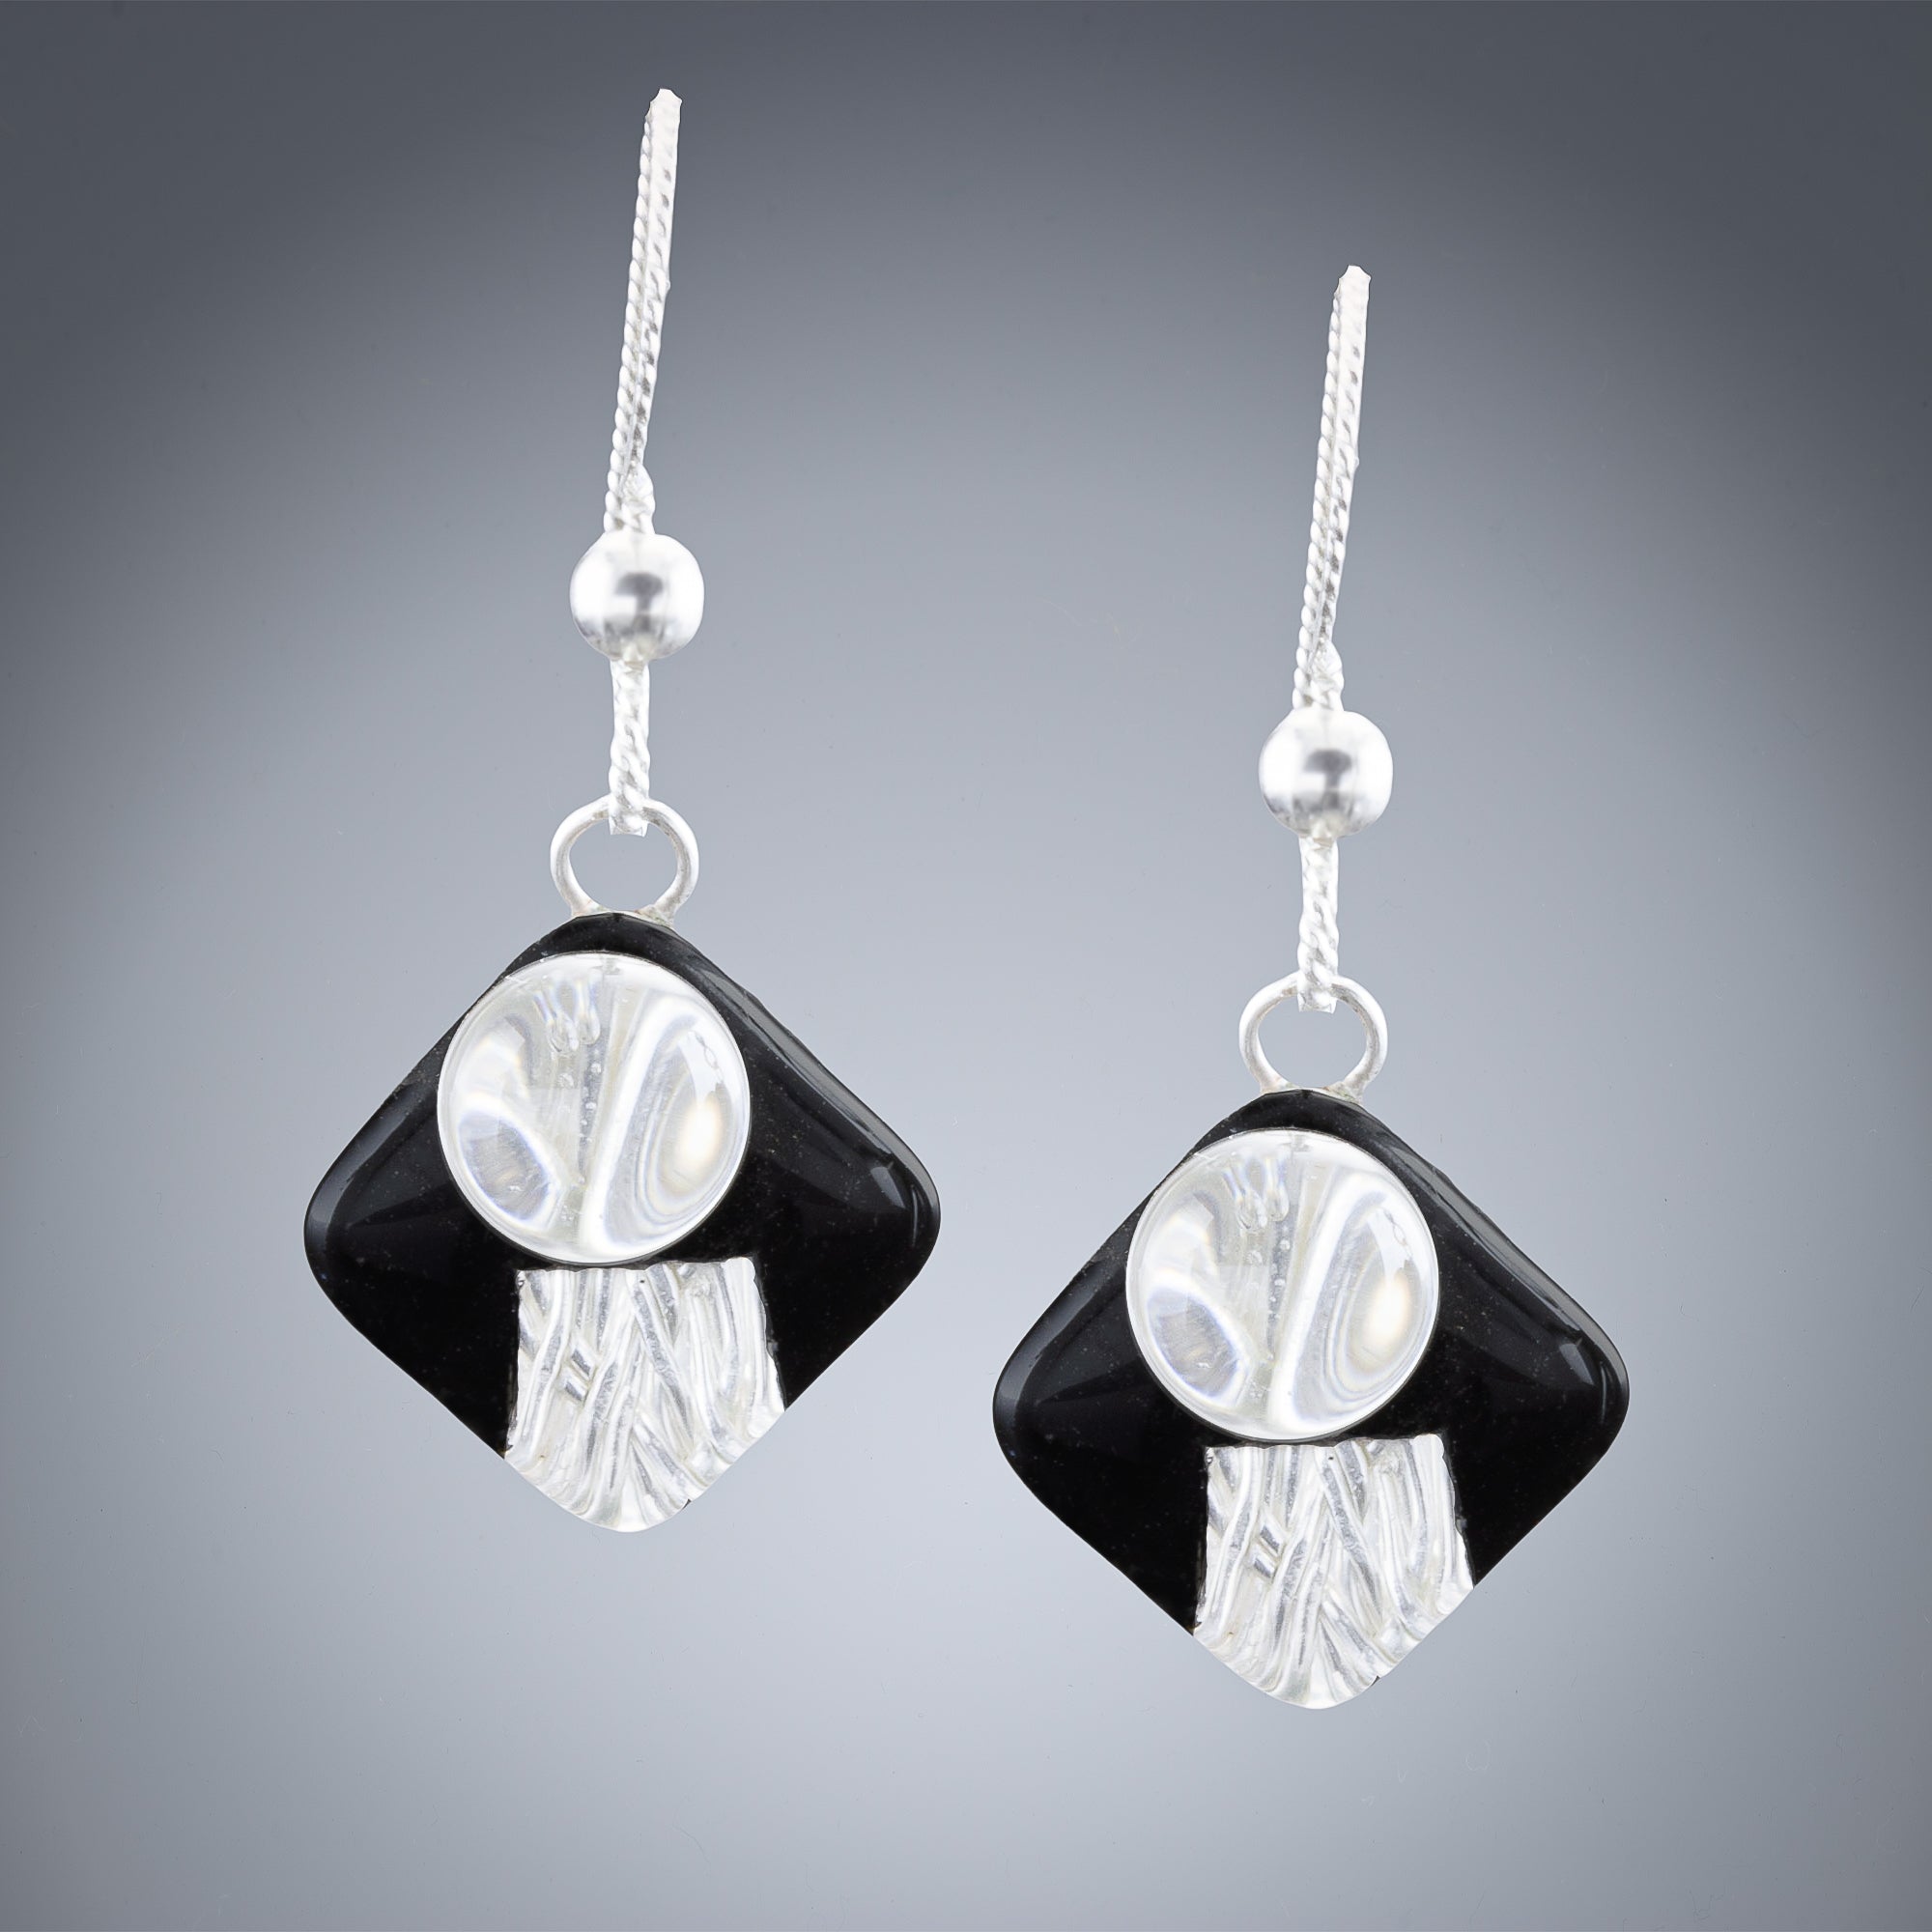 Handwoven Black and Silver Art Deco Inspired Earrings in Sterling Silver